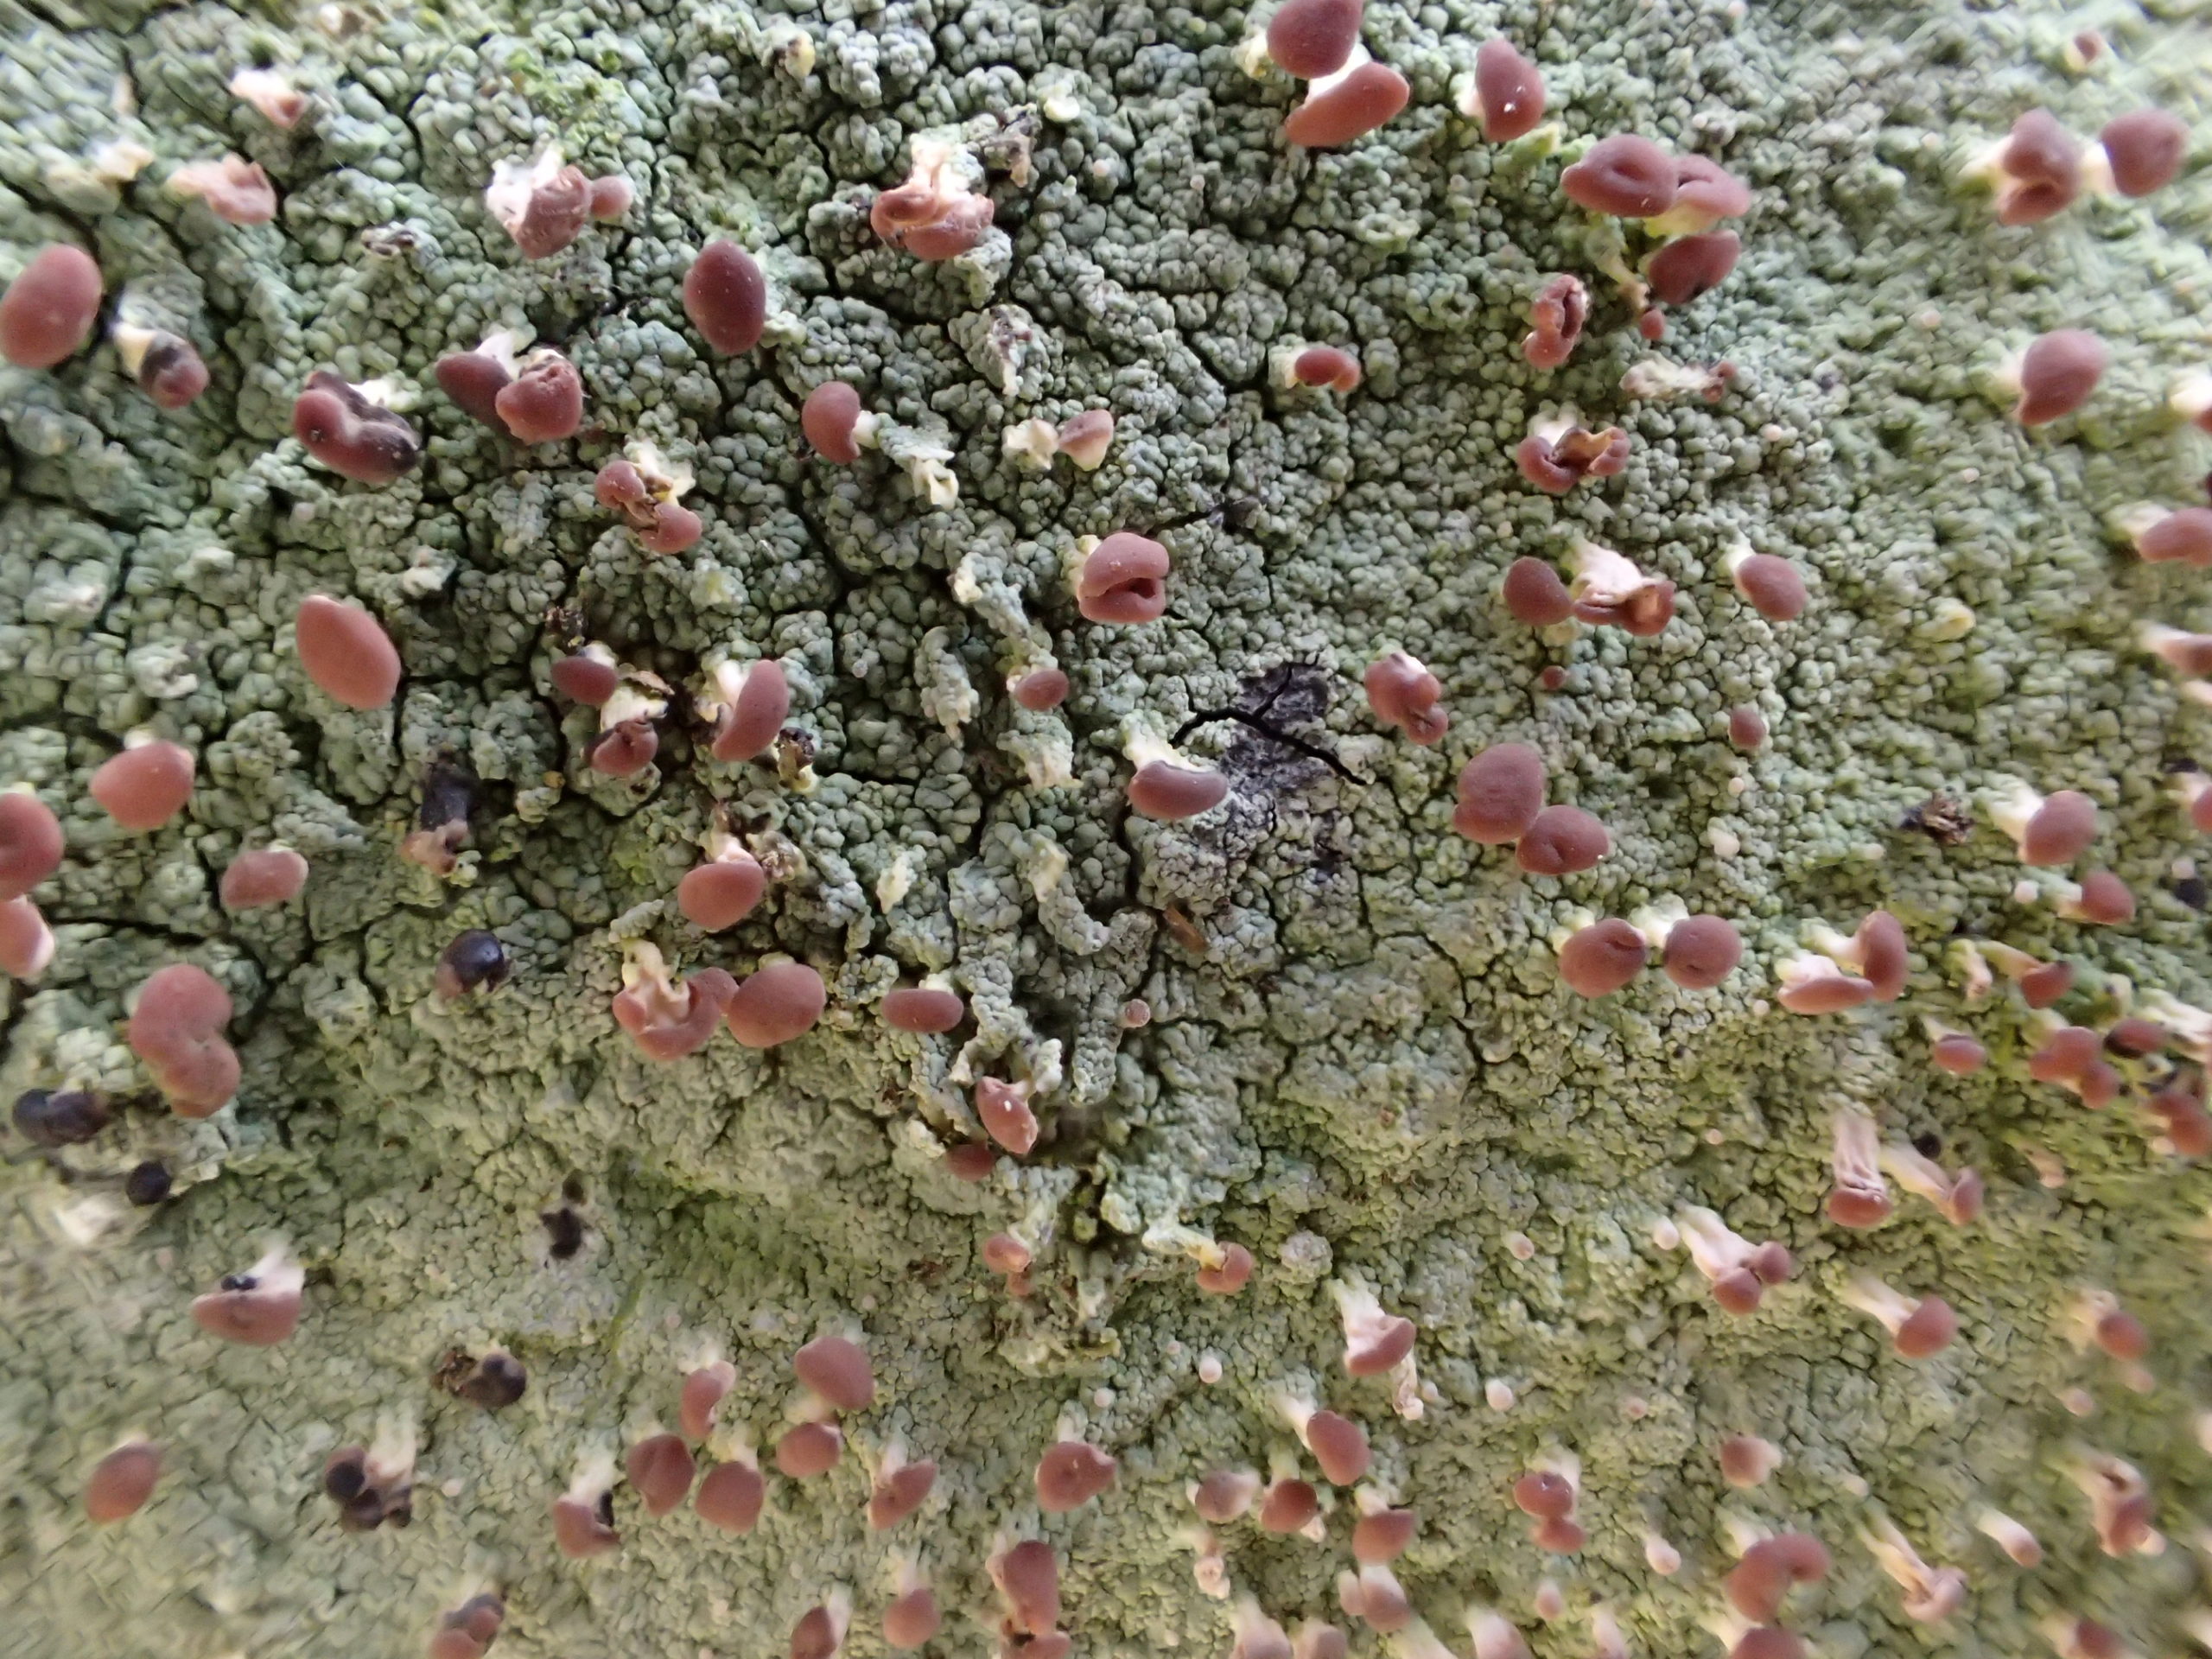 Baeomyces rufus on a dry-stone wall